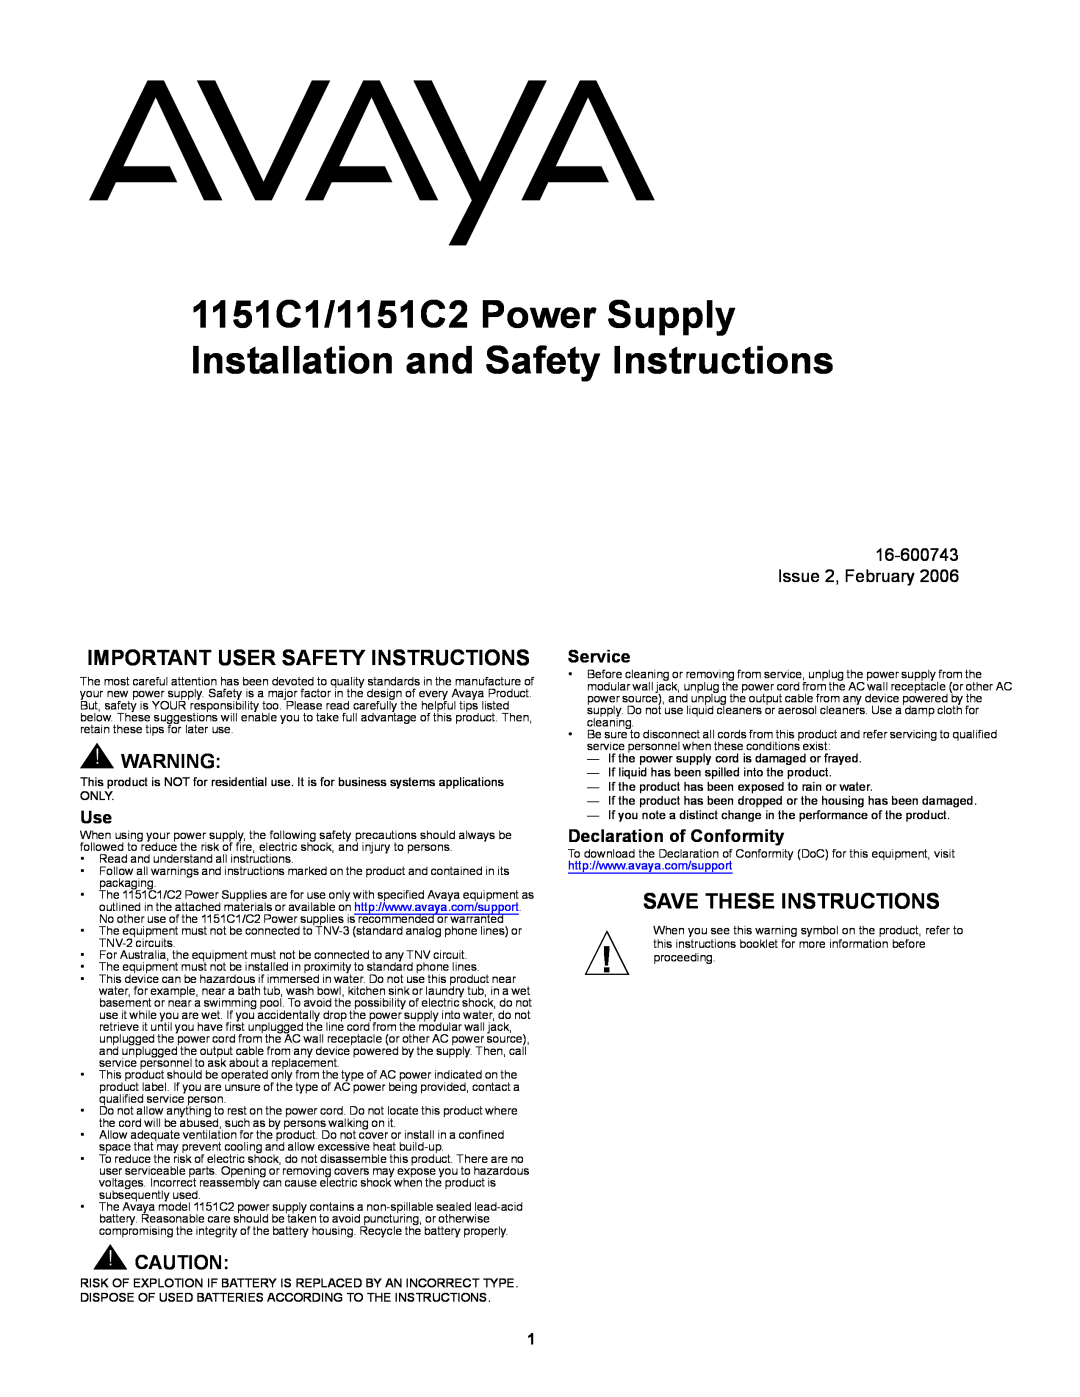 Avaya 1151C1 user service Important User Safety Instructions, Save These Instructions, Service, Declaration of Conformity 